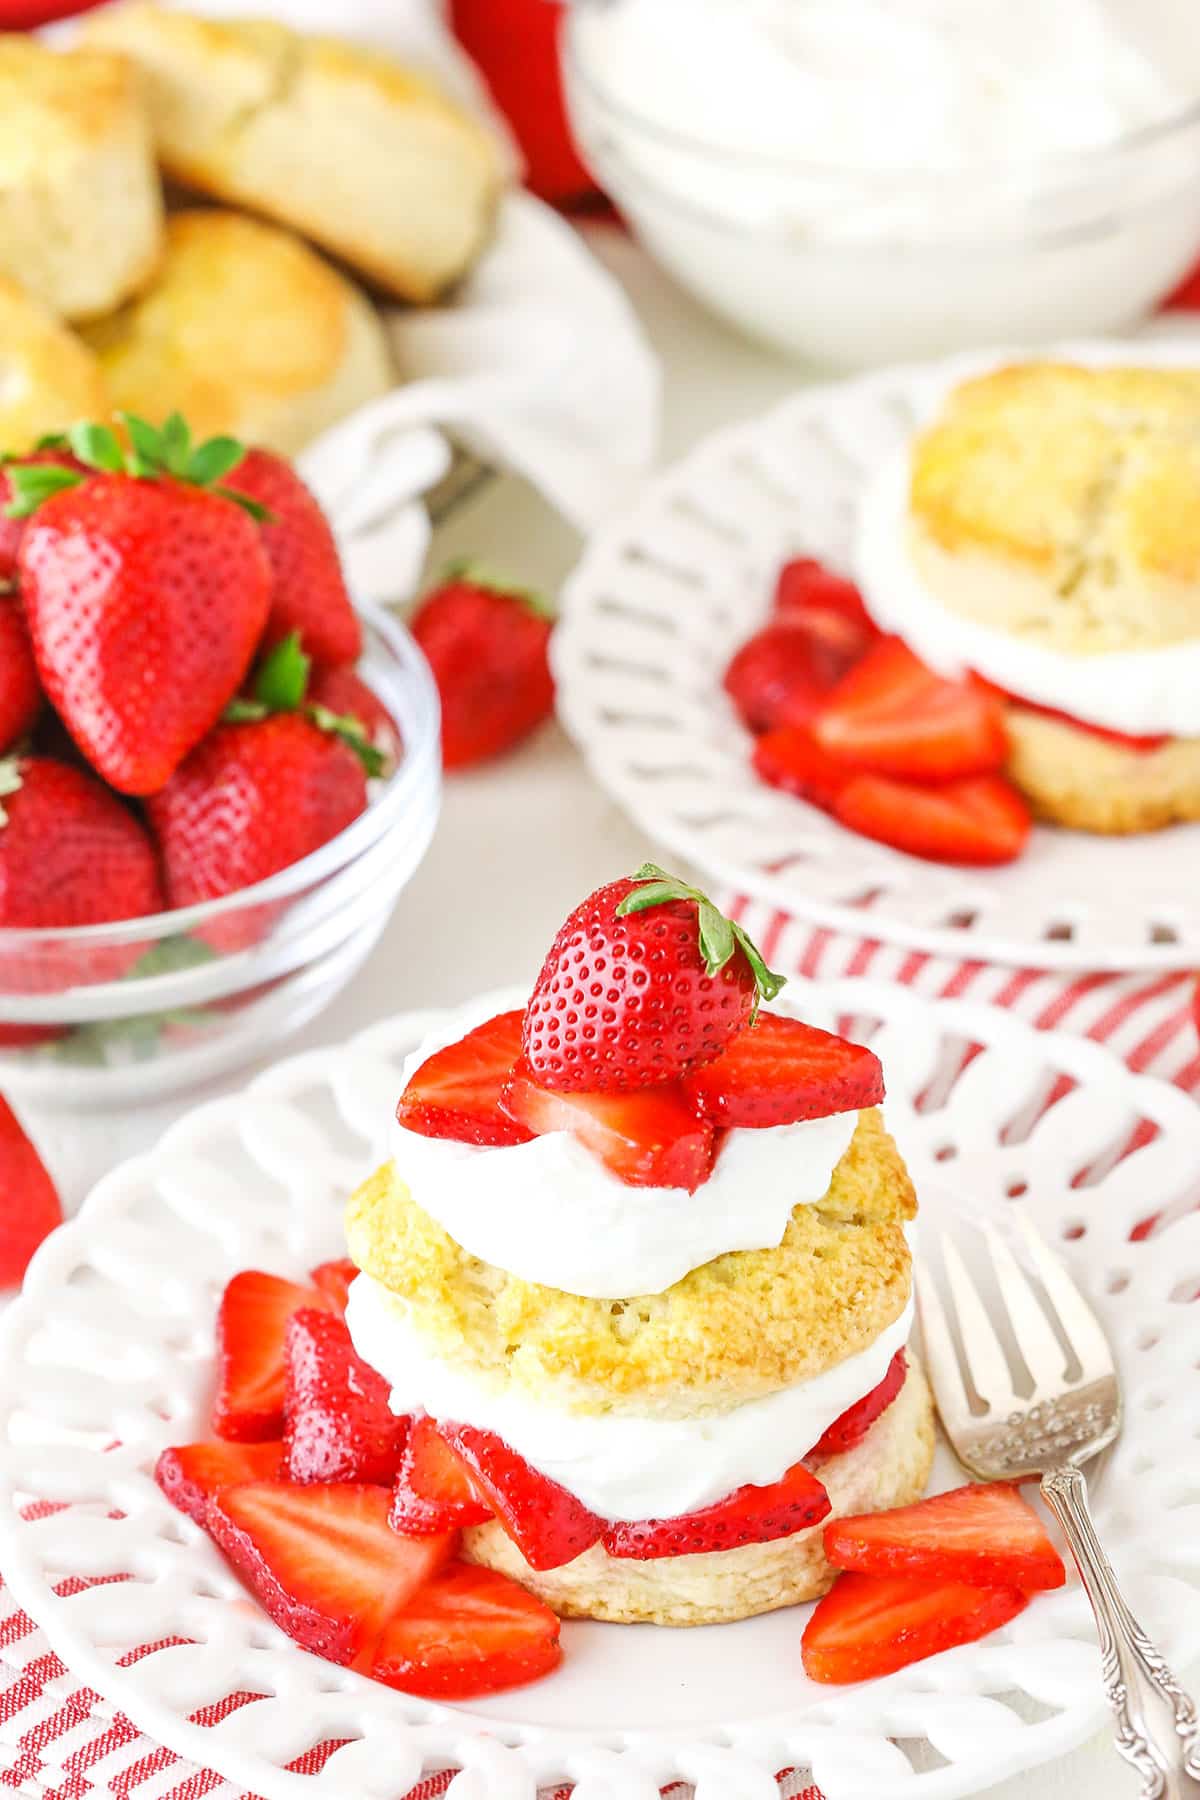 Strawberry shortcake with fresh sliced strawberries on top.